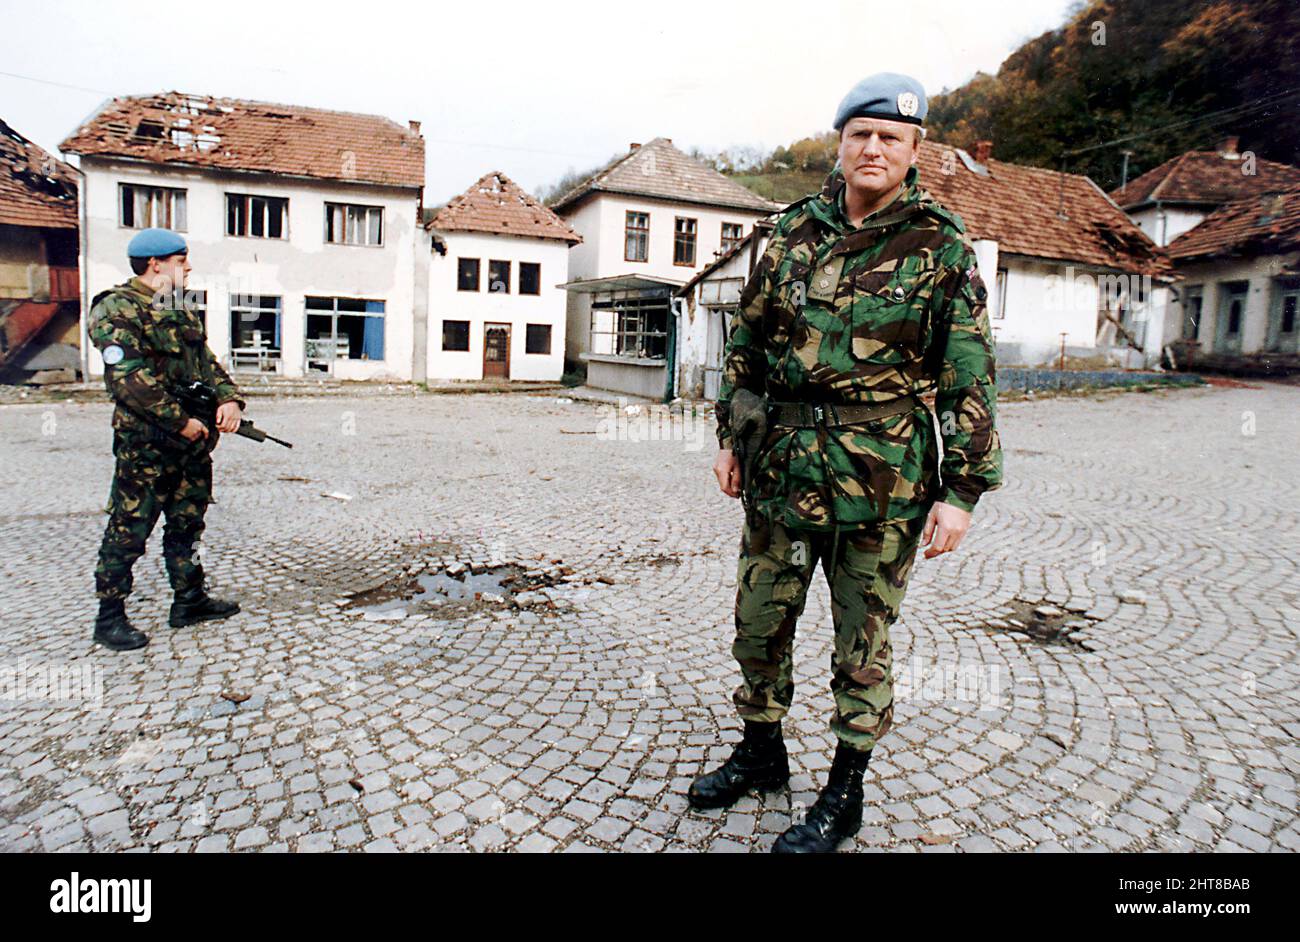 COL BOB STEWART, British Army Commander on UN Duty in Bosnia. He was the Commanding Officer of the 1st Battalion, The Cheshire Regiment. . REXMAILPIX. Stock Photo